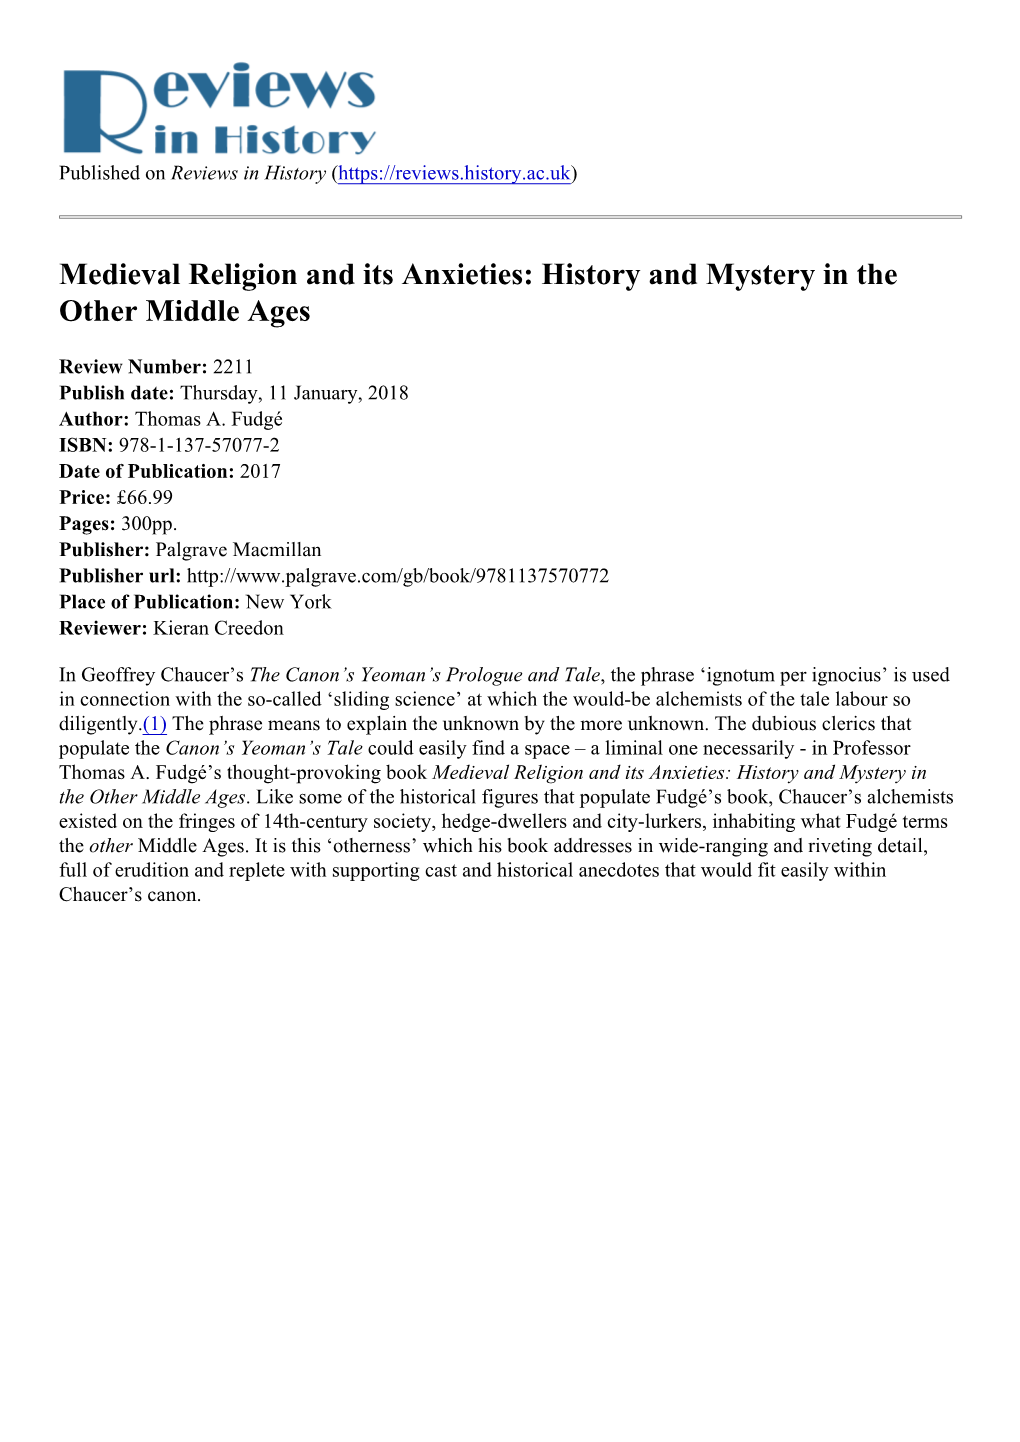 Medieval Religion and Its Anxieties: History and Mystery in the Other Middle Ages